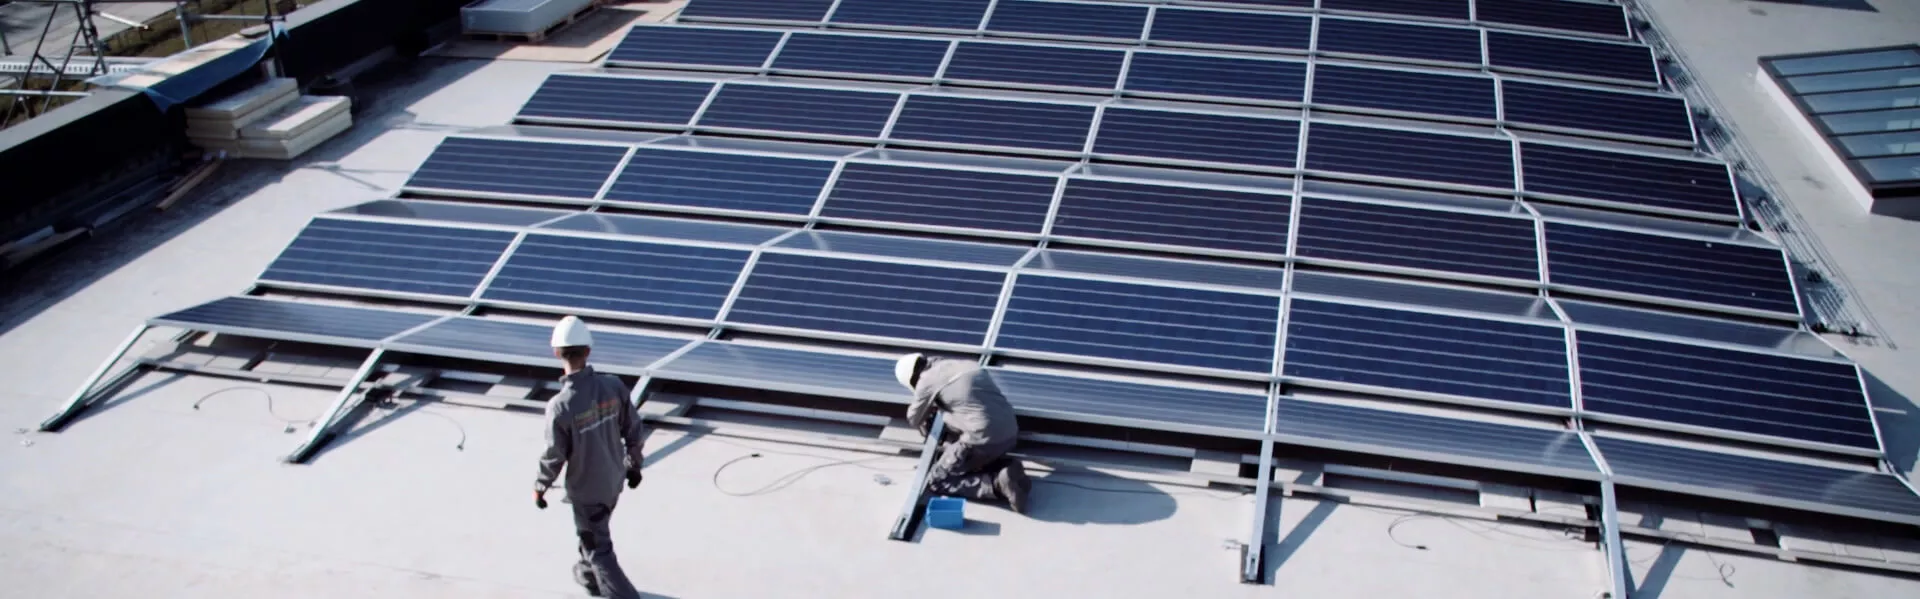 Developers on rooftop by solar panels